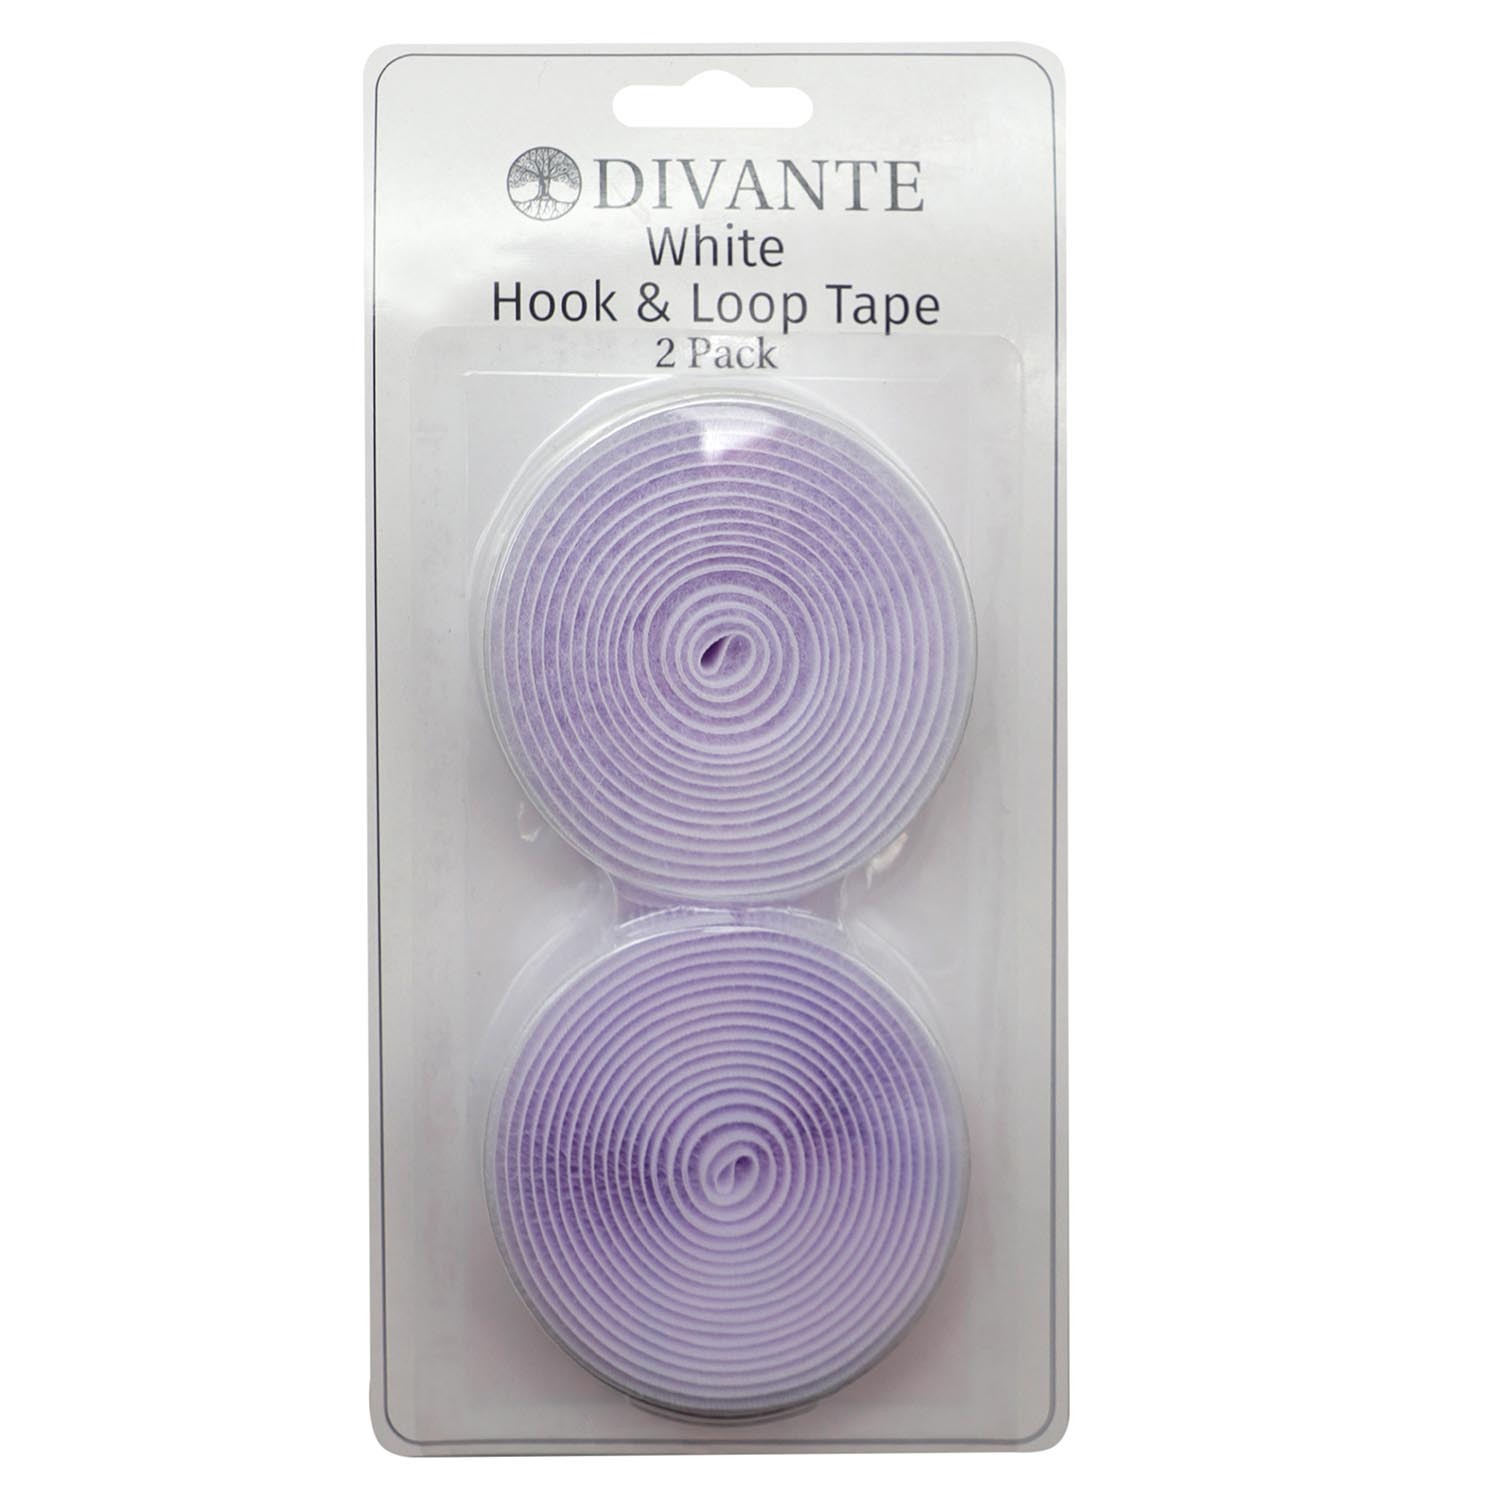 Divante White Hook and Loop Tape 2 Pack Image